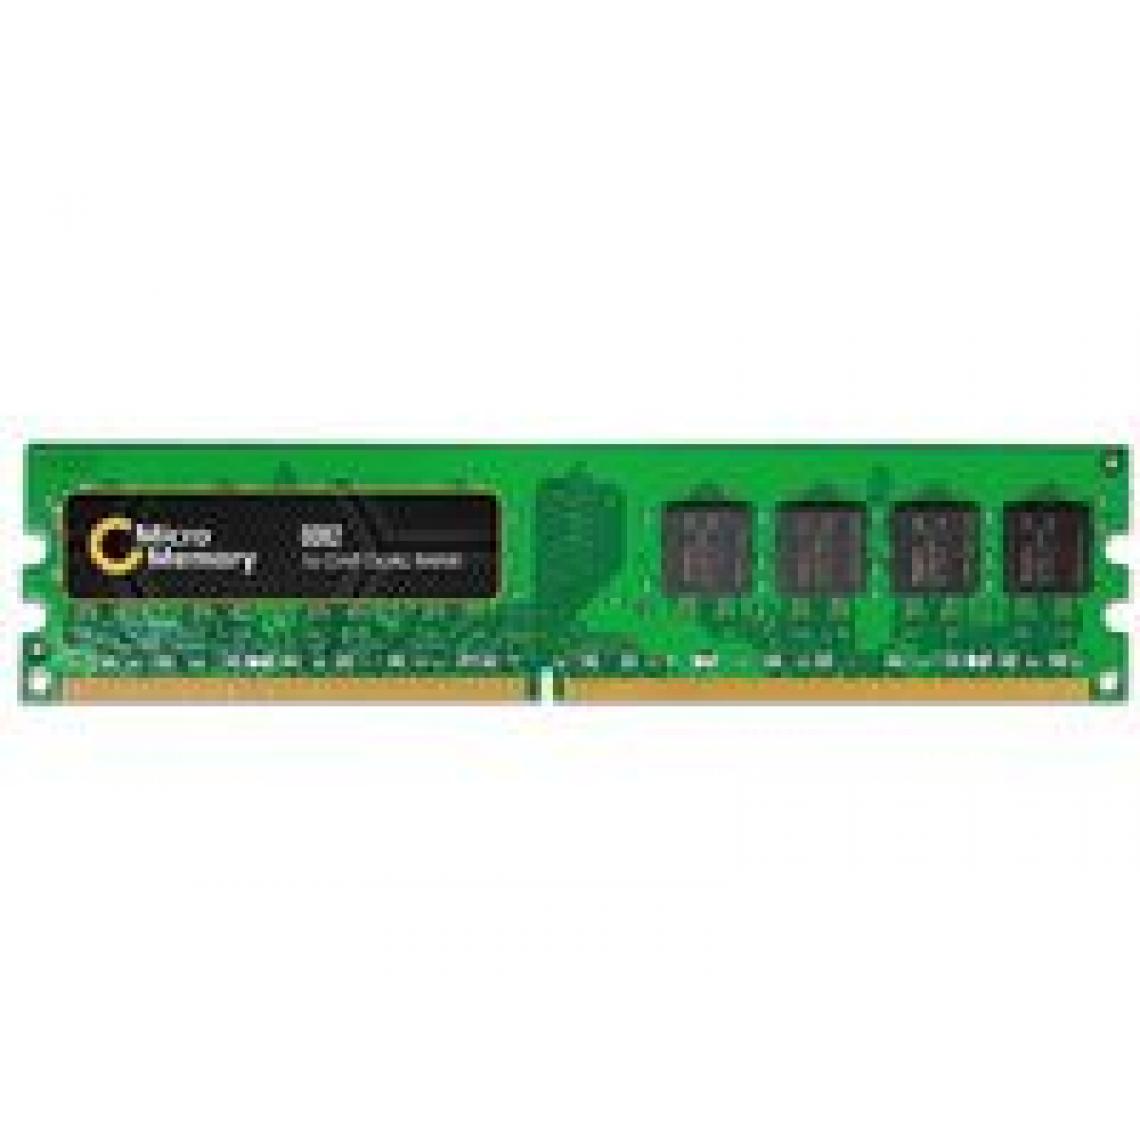 Because Music - 2GB DDR2 667MHZ DIMM Module - RAM PC Fixe